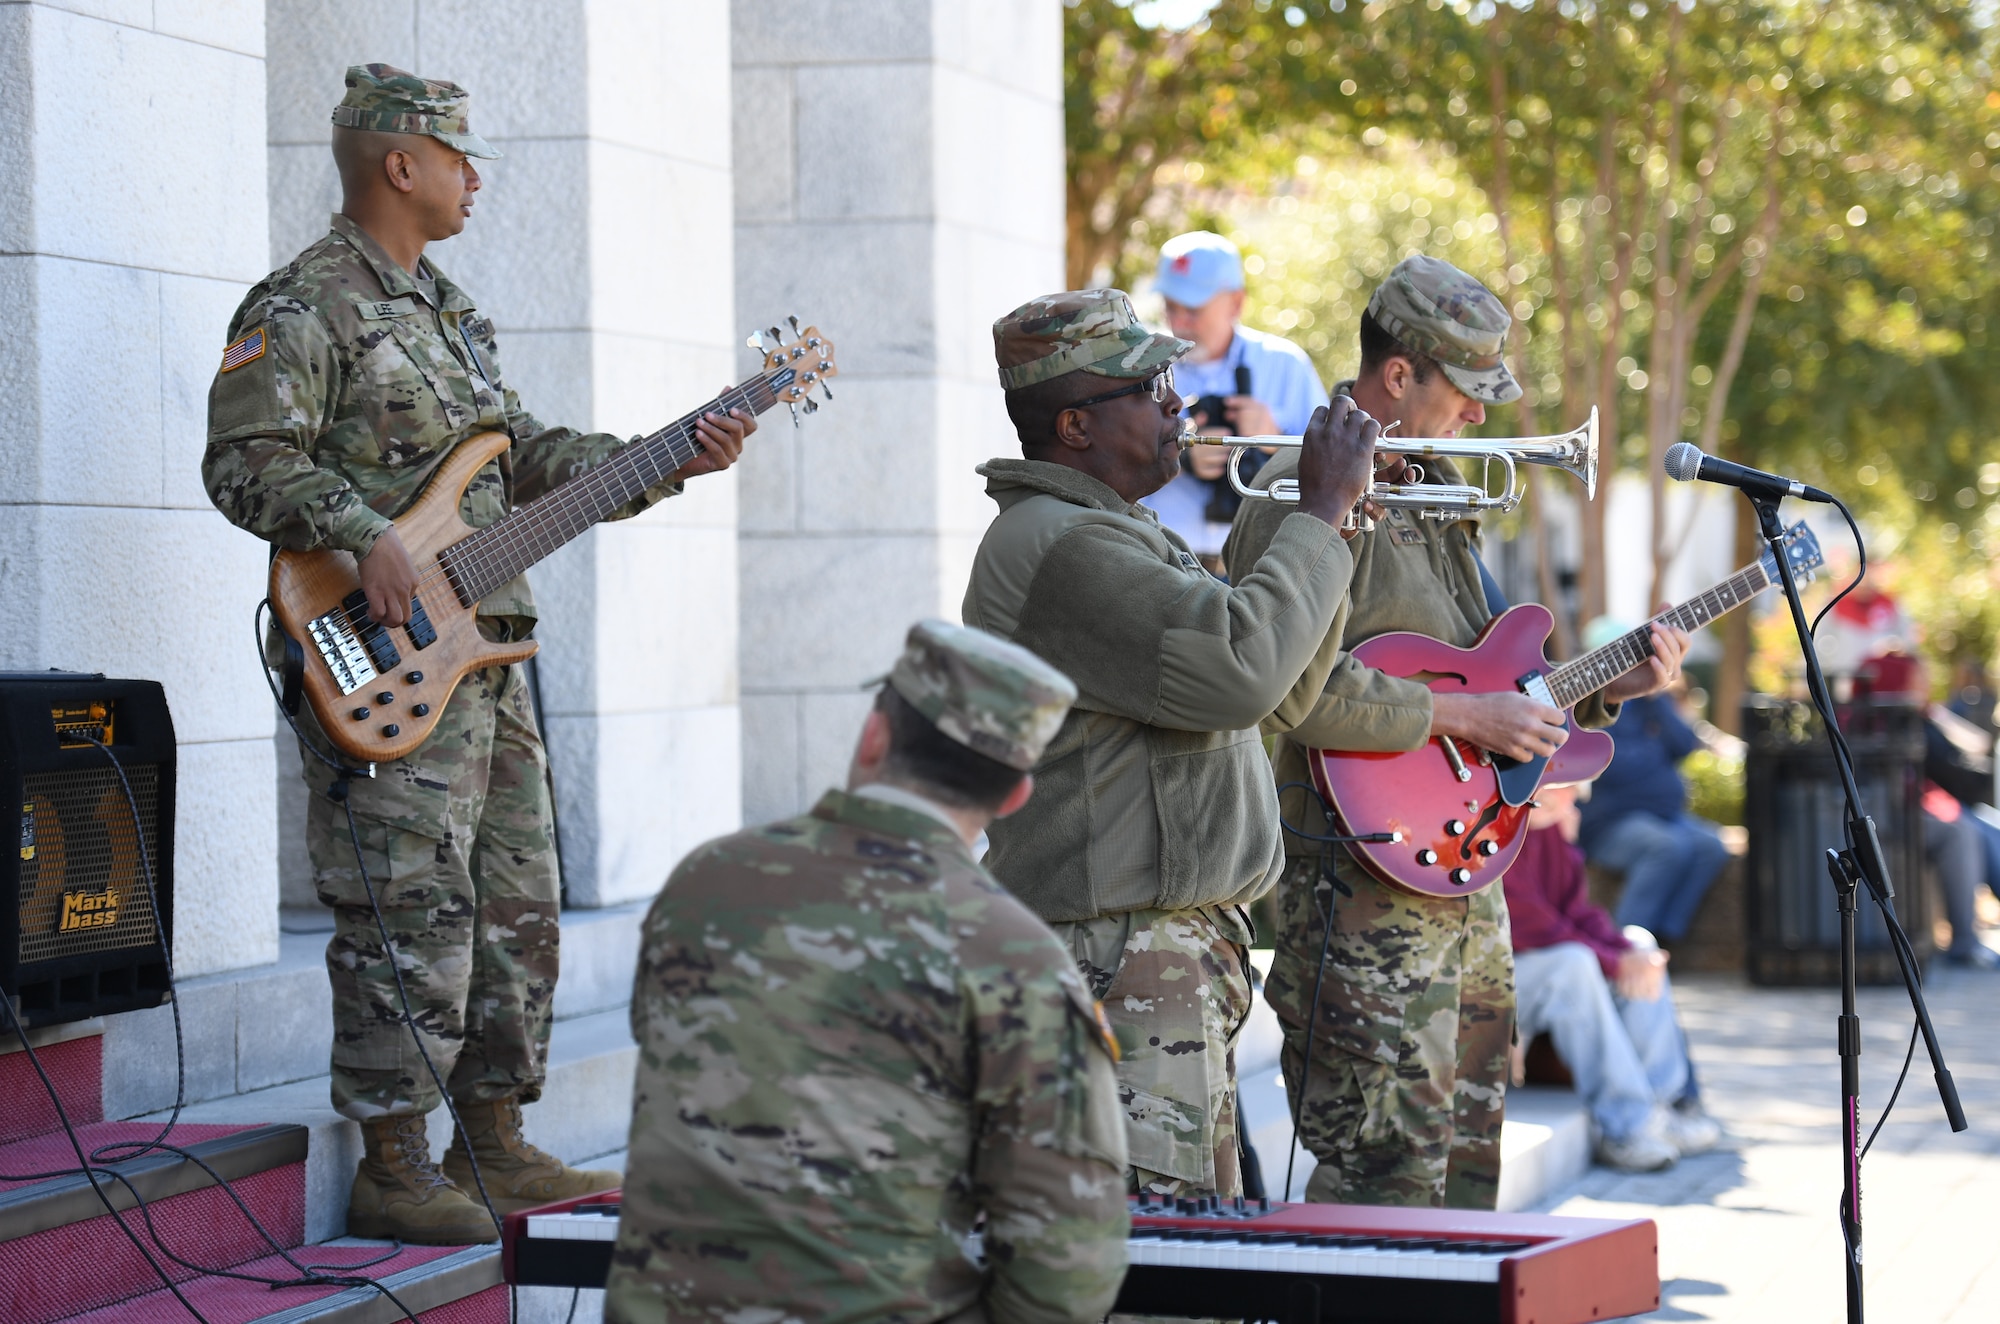 Members of the U.S. Army 41st Army Band perform during the 21st Annual Gulf Coast Veterans Day Parade in Biloxi, Mississippi, Nov. 6, 2021. Keesler Air Force Base leadership, along with hundreds of Airmen, attended and participated in the parade in support of all veterans, past and present. More than 50 unique floats, marching bands and military units marched in the largest Veterans Day parade on the Gulf Coast. (U.S. Air Force photo by Kemberly Groue)